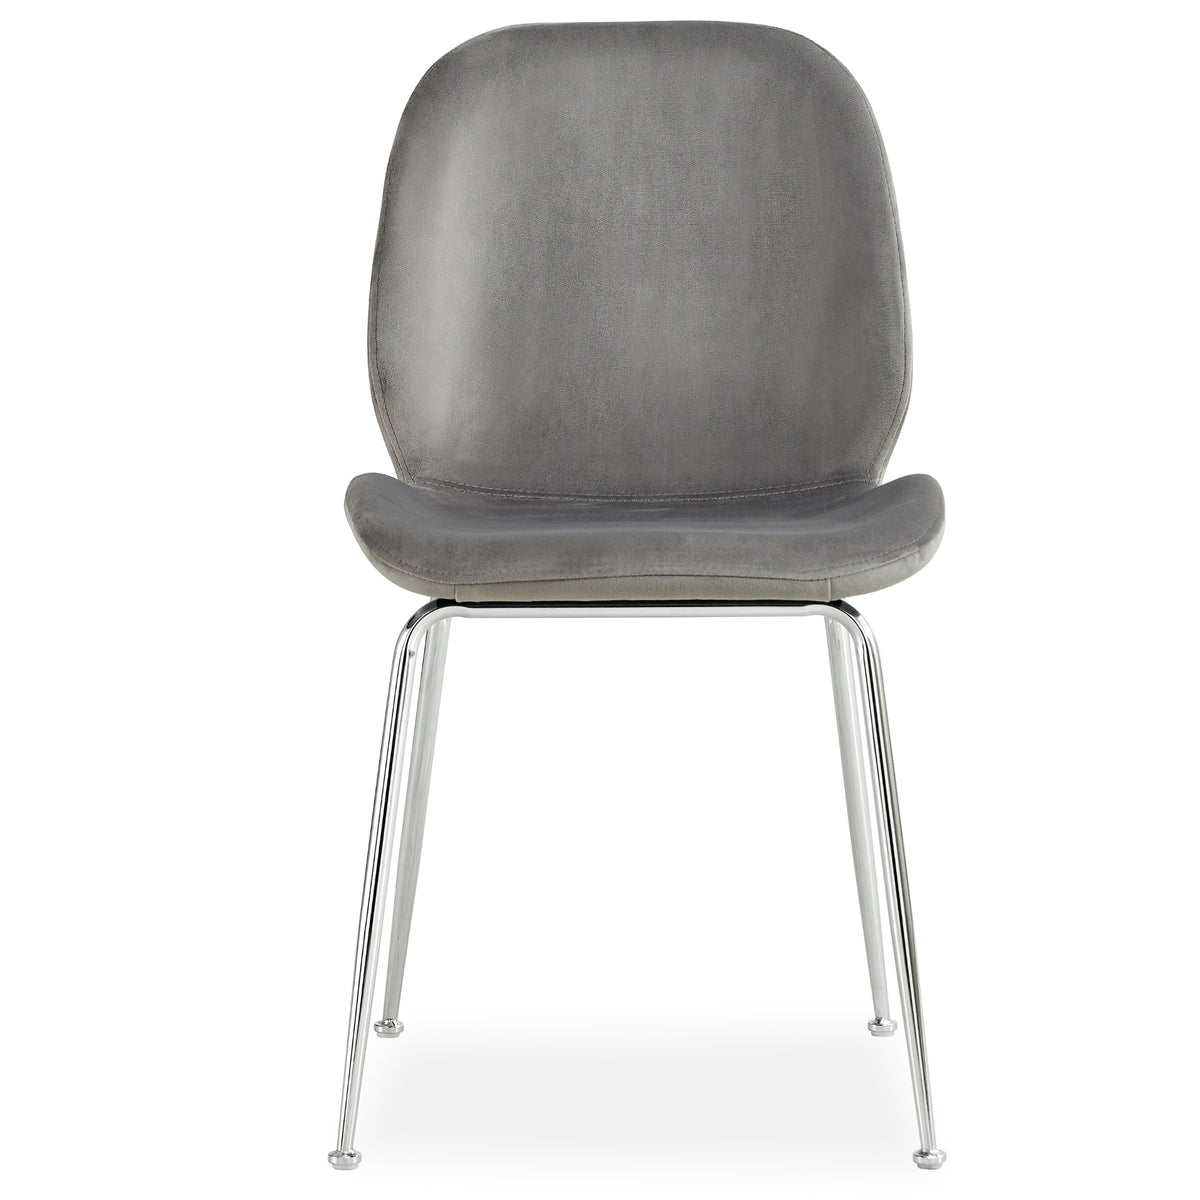 Remy Set of 2 Dining Chair Grey 